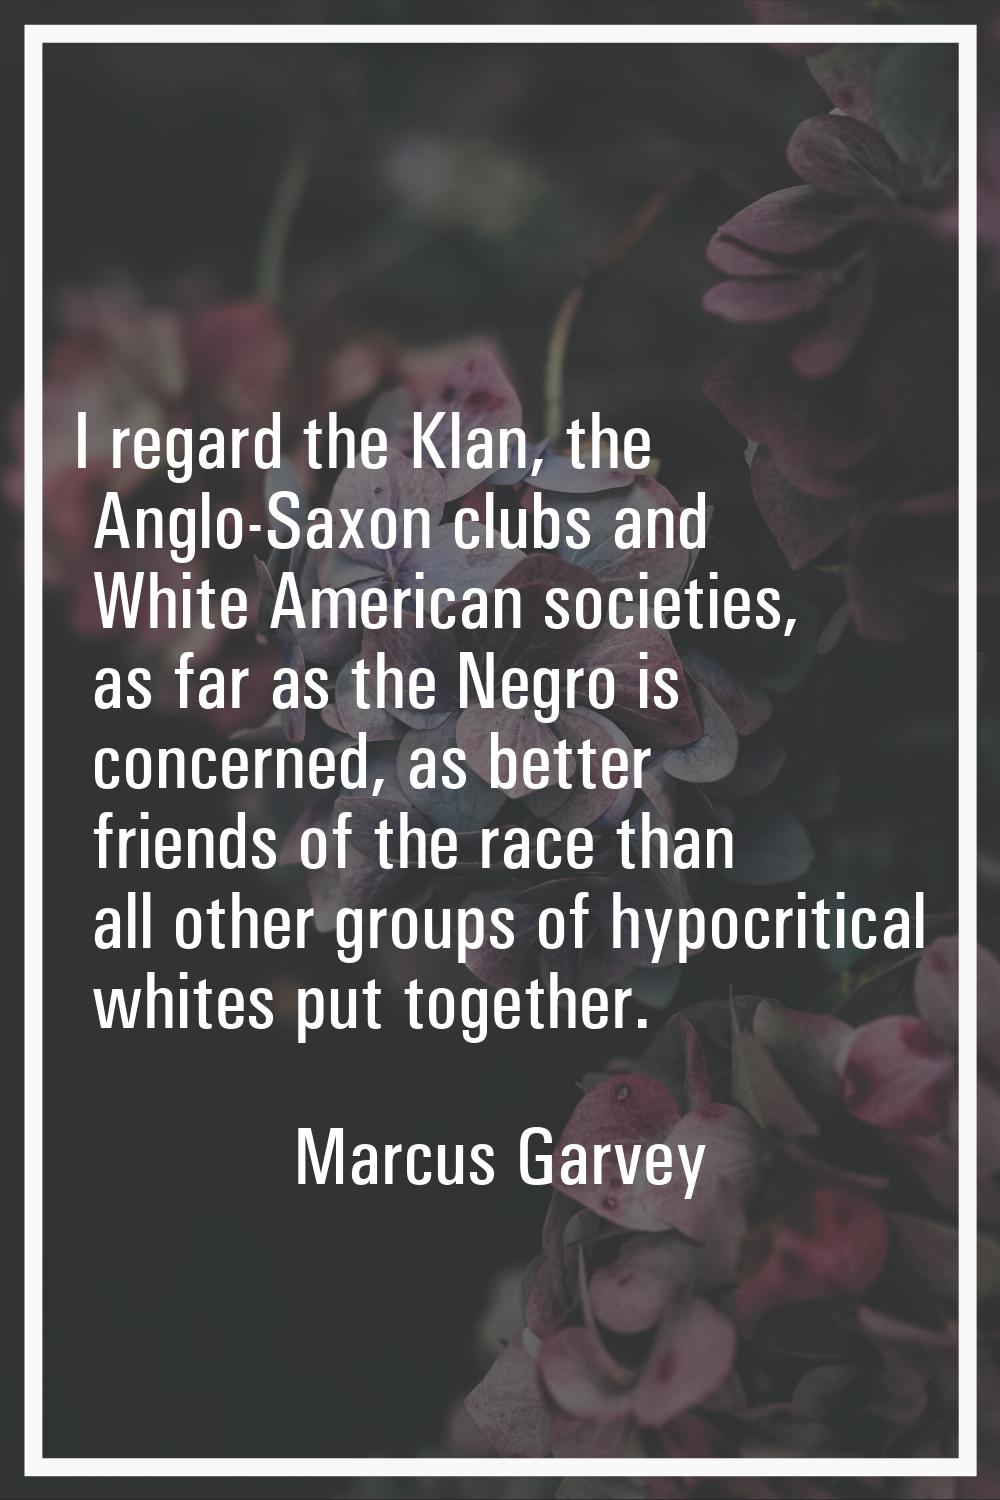 I regard the Klan, the Anglo-Saxon clubs and White American societies, as far as the Negro is conce